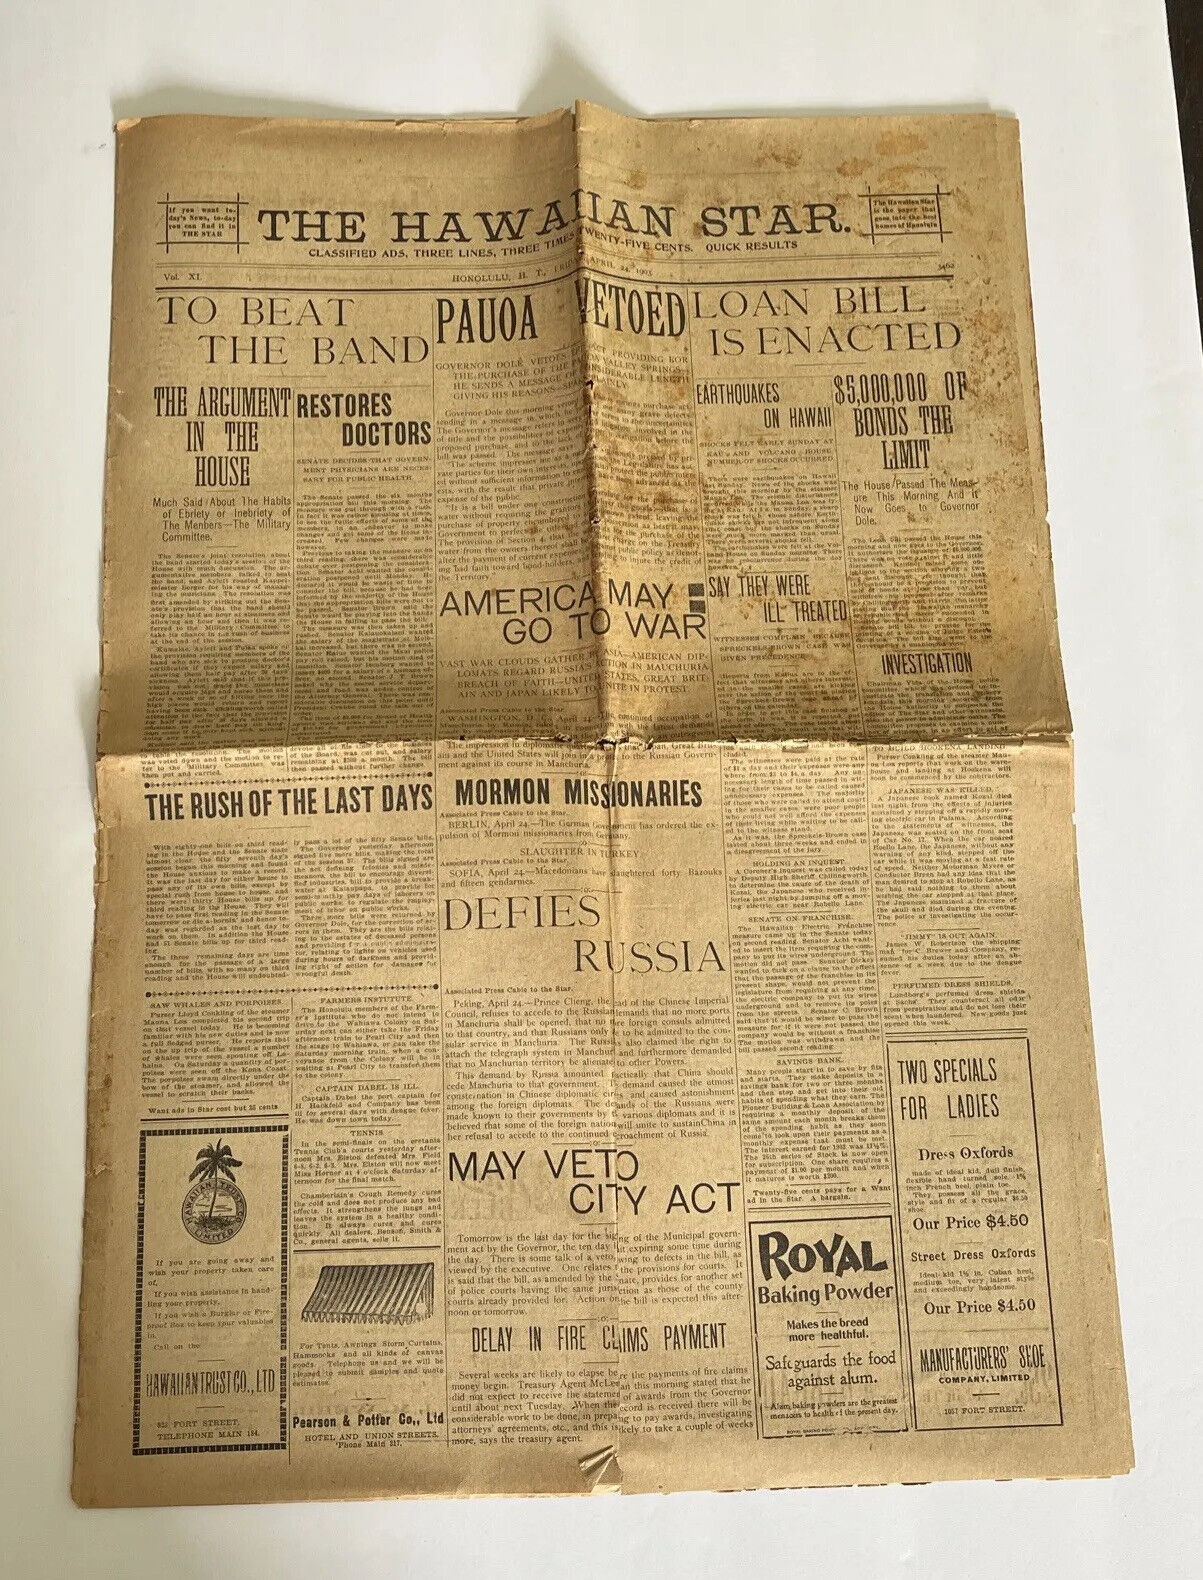 Hawaiian Star Newspaper April 24 1903 RARE 8 Page Daily Edition w Vintage Ads